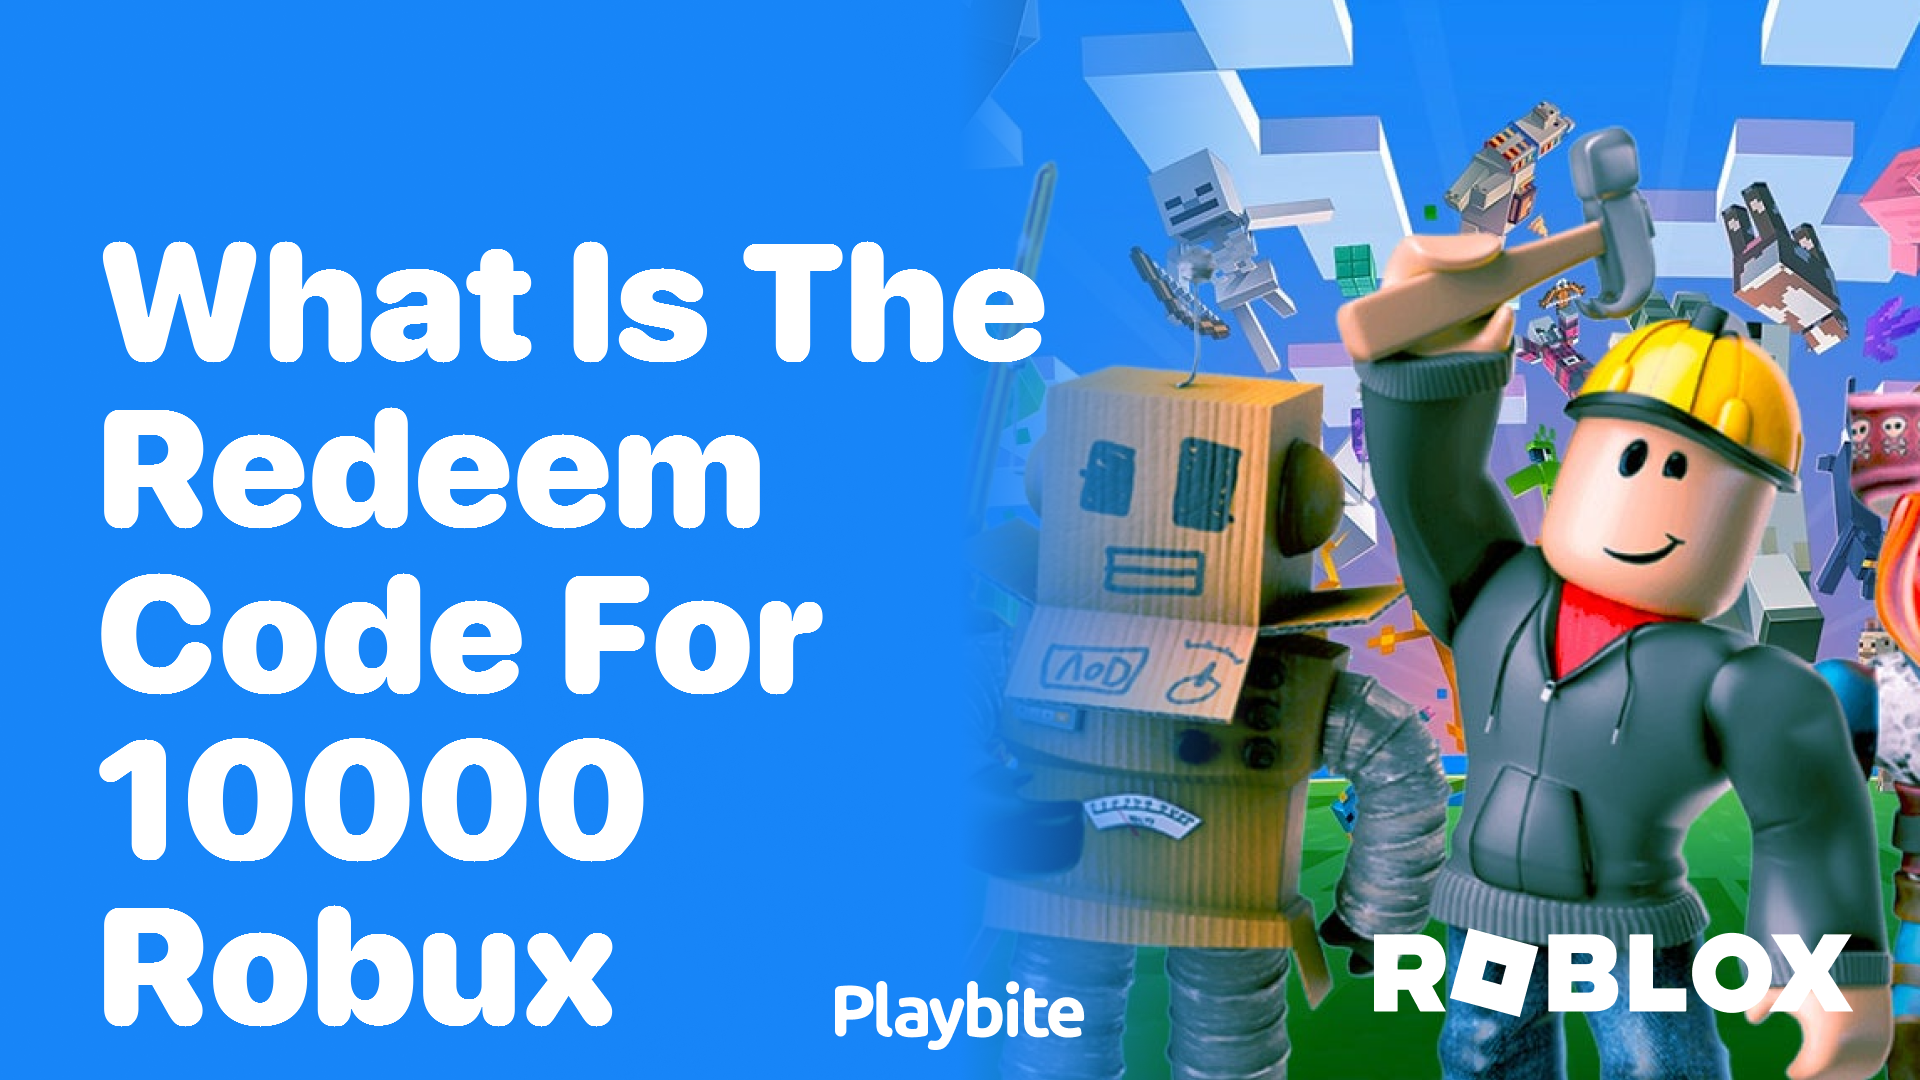 What Is the Redeem Code for 10000 Robux? - Playbite